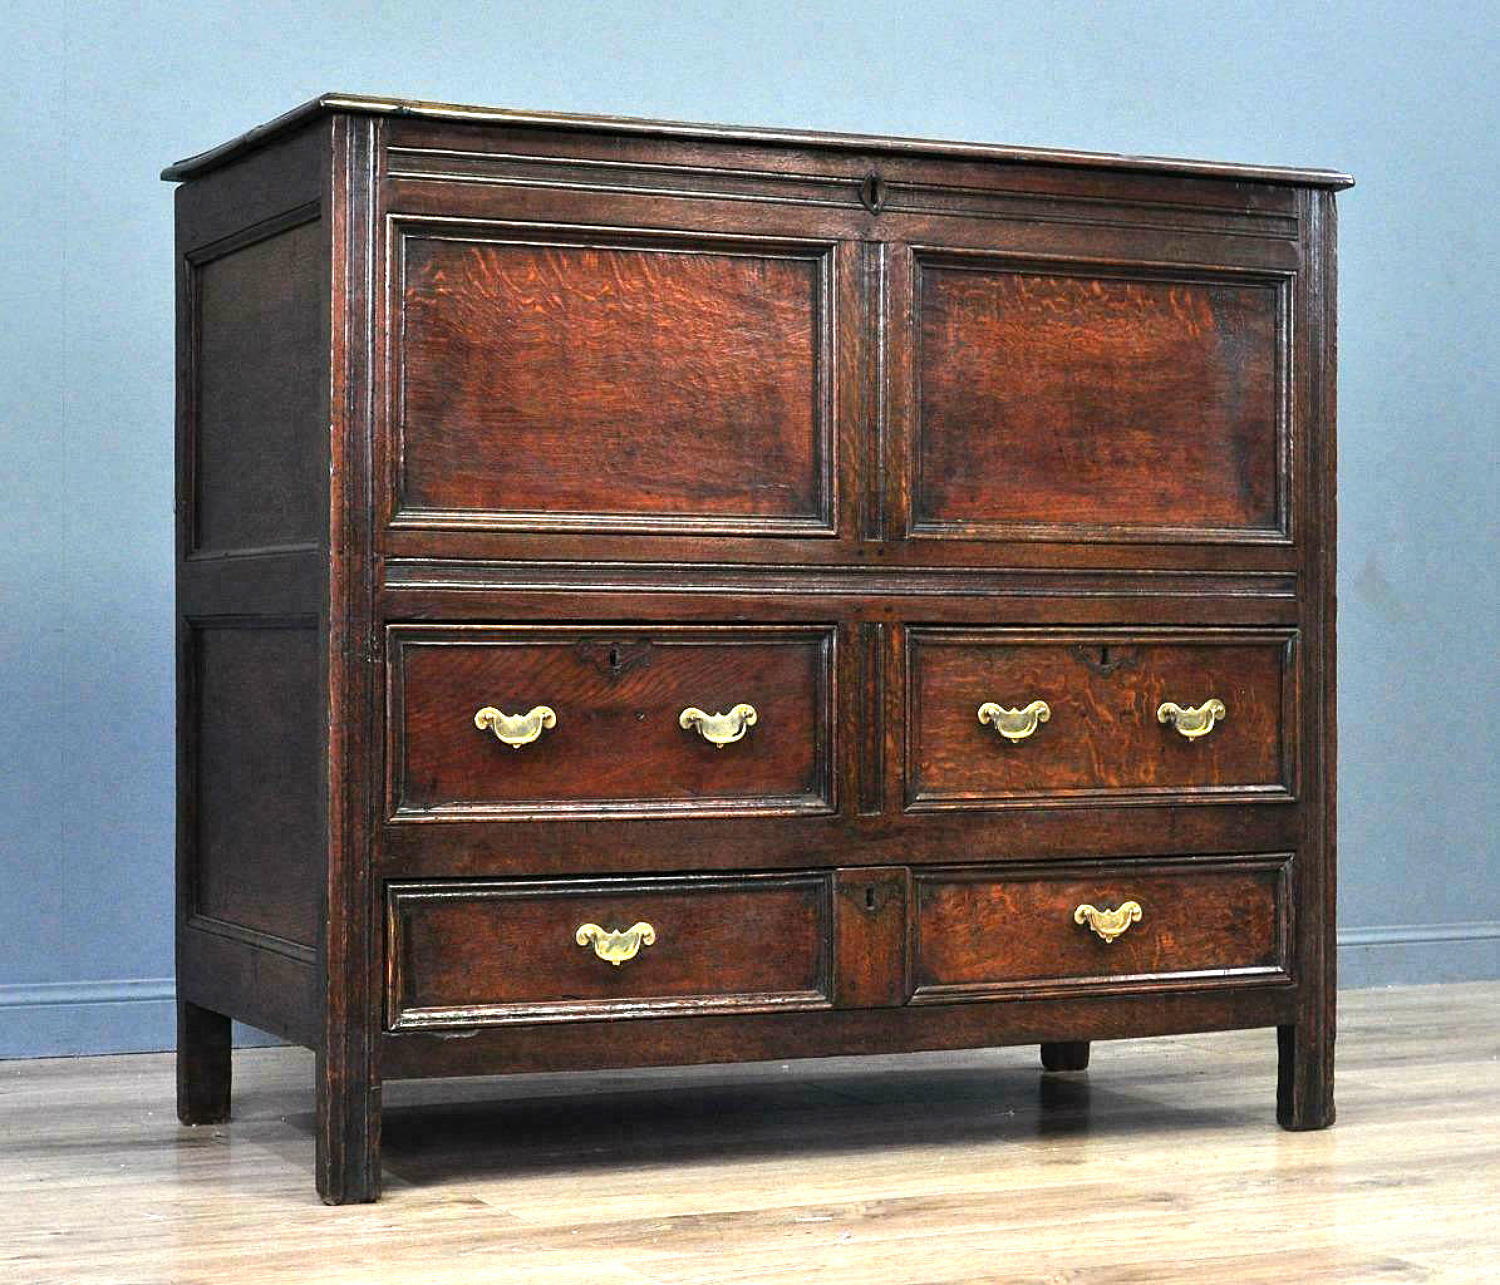 Antique 18thc Oak Joined Lidded Chest With Drawers. English. C1740-60.